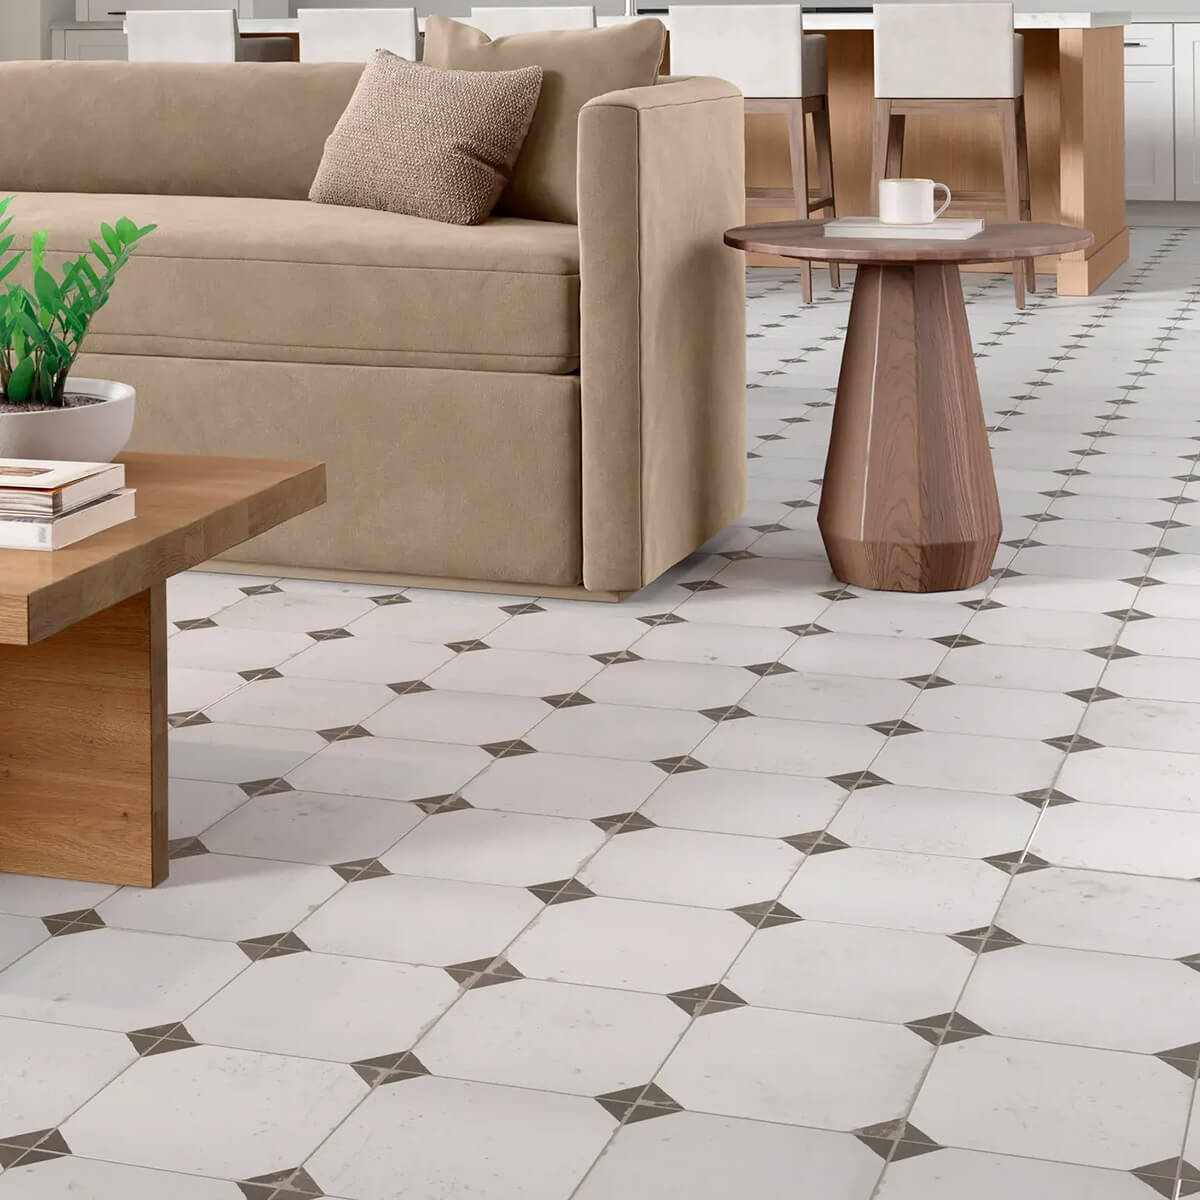 Tile flooring for living area |  Mid-Michigan Floor Coverings